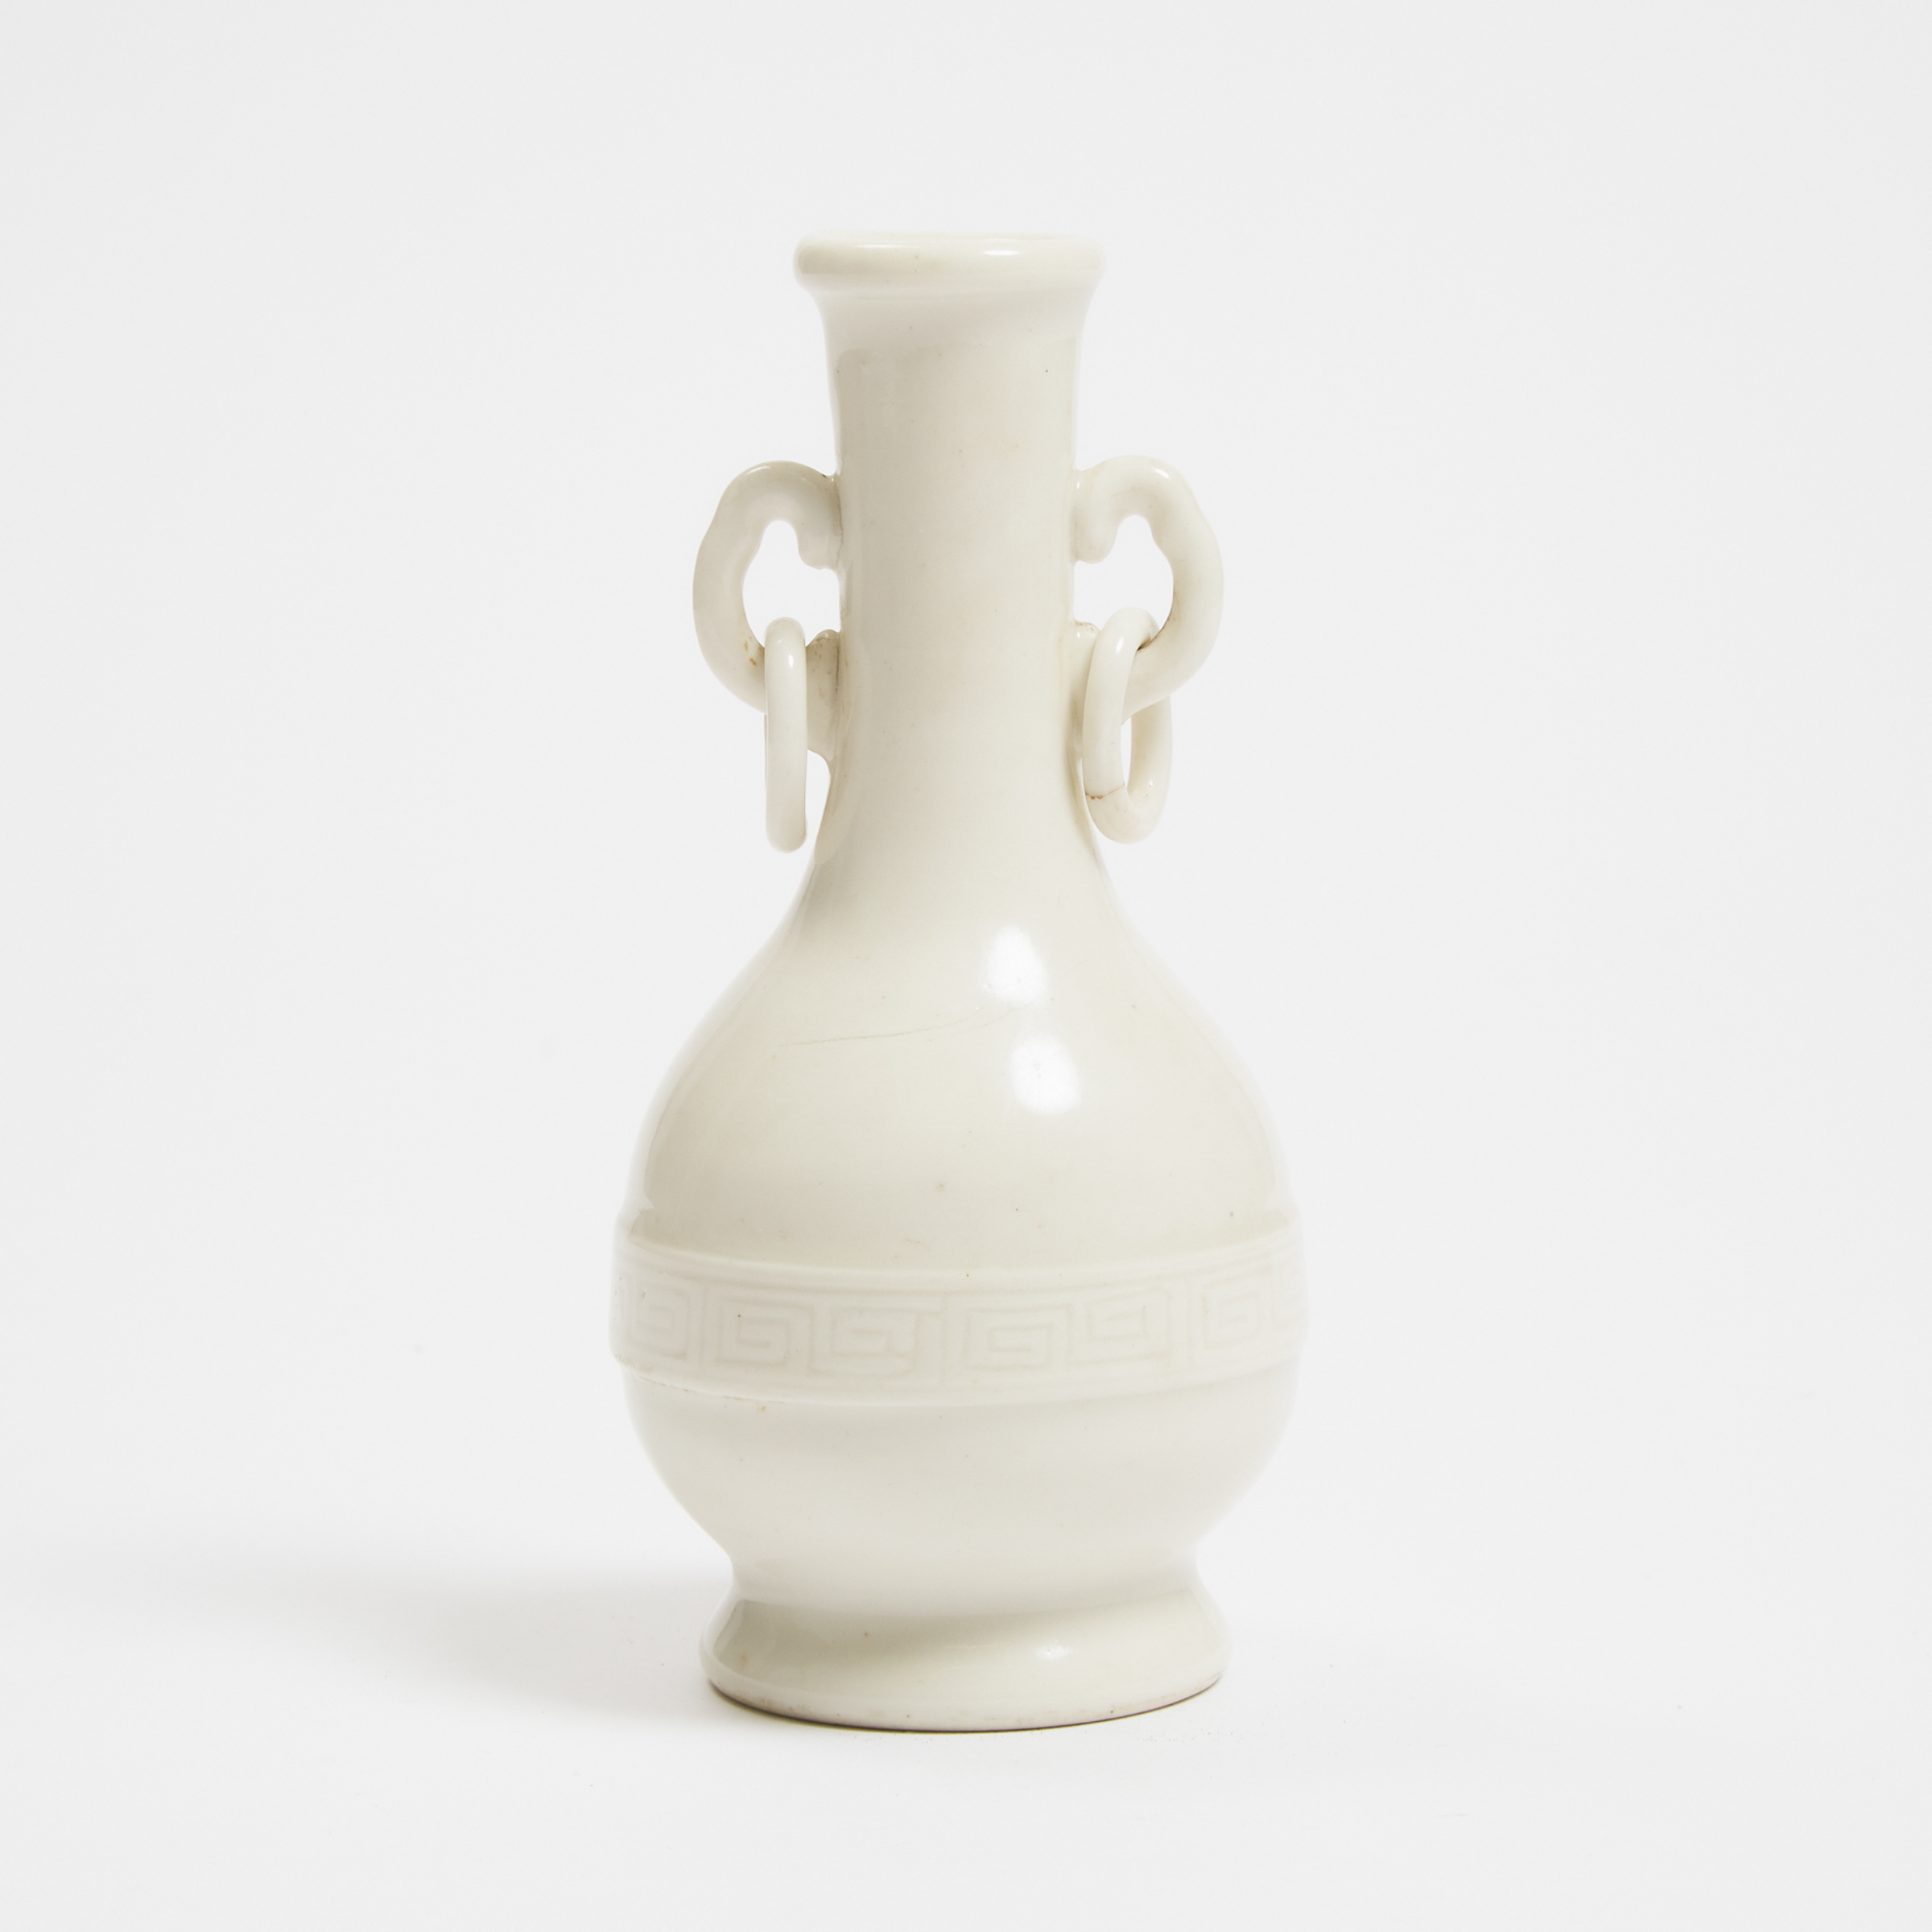 A Dehua Blanc-de-Chine Pear-Shaped Vase with Suspended Ring Handles, Qing Dynasty, 18th Century